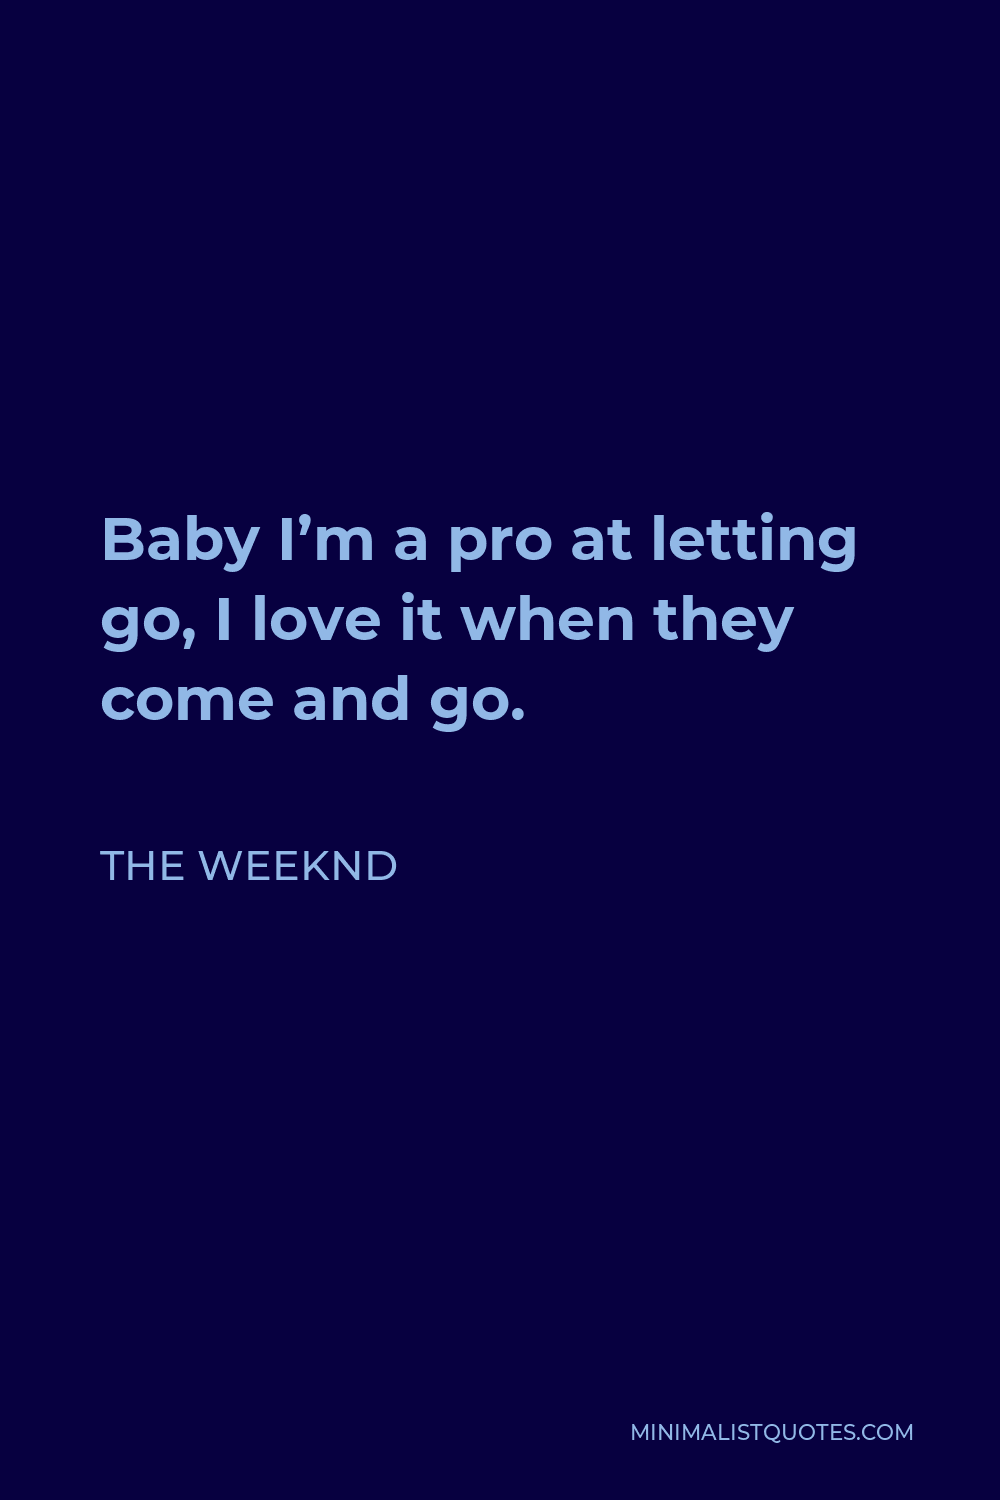 The Weeknd Quote - Baby I’m a pro at letting go, I love it when they come and go.